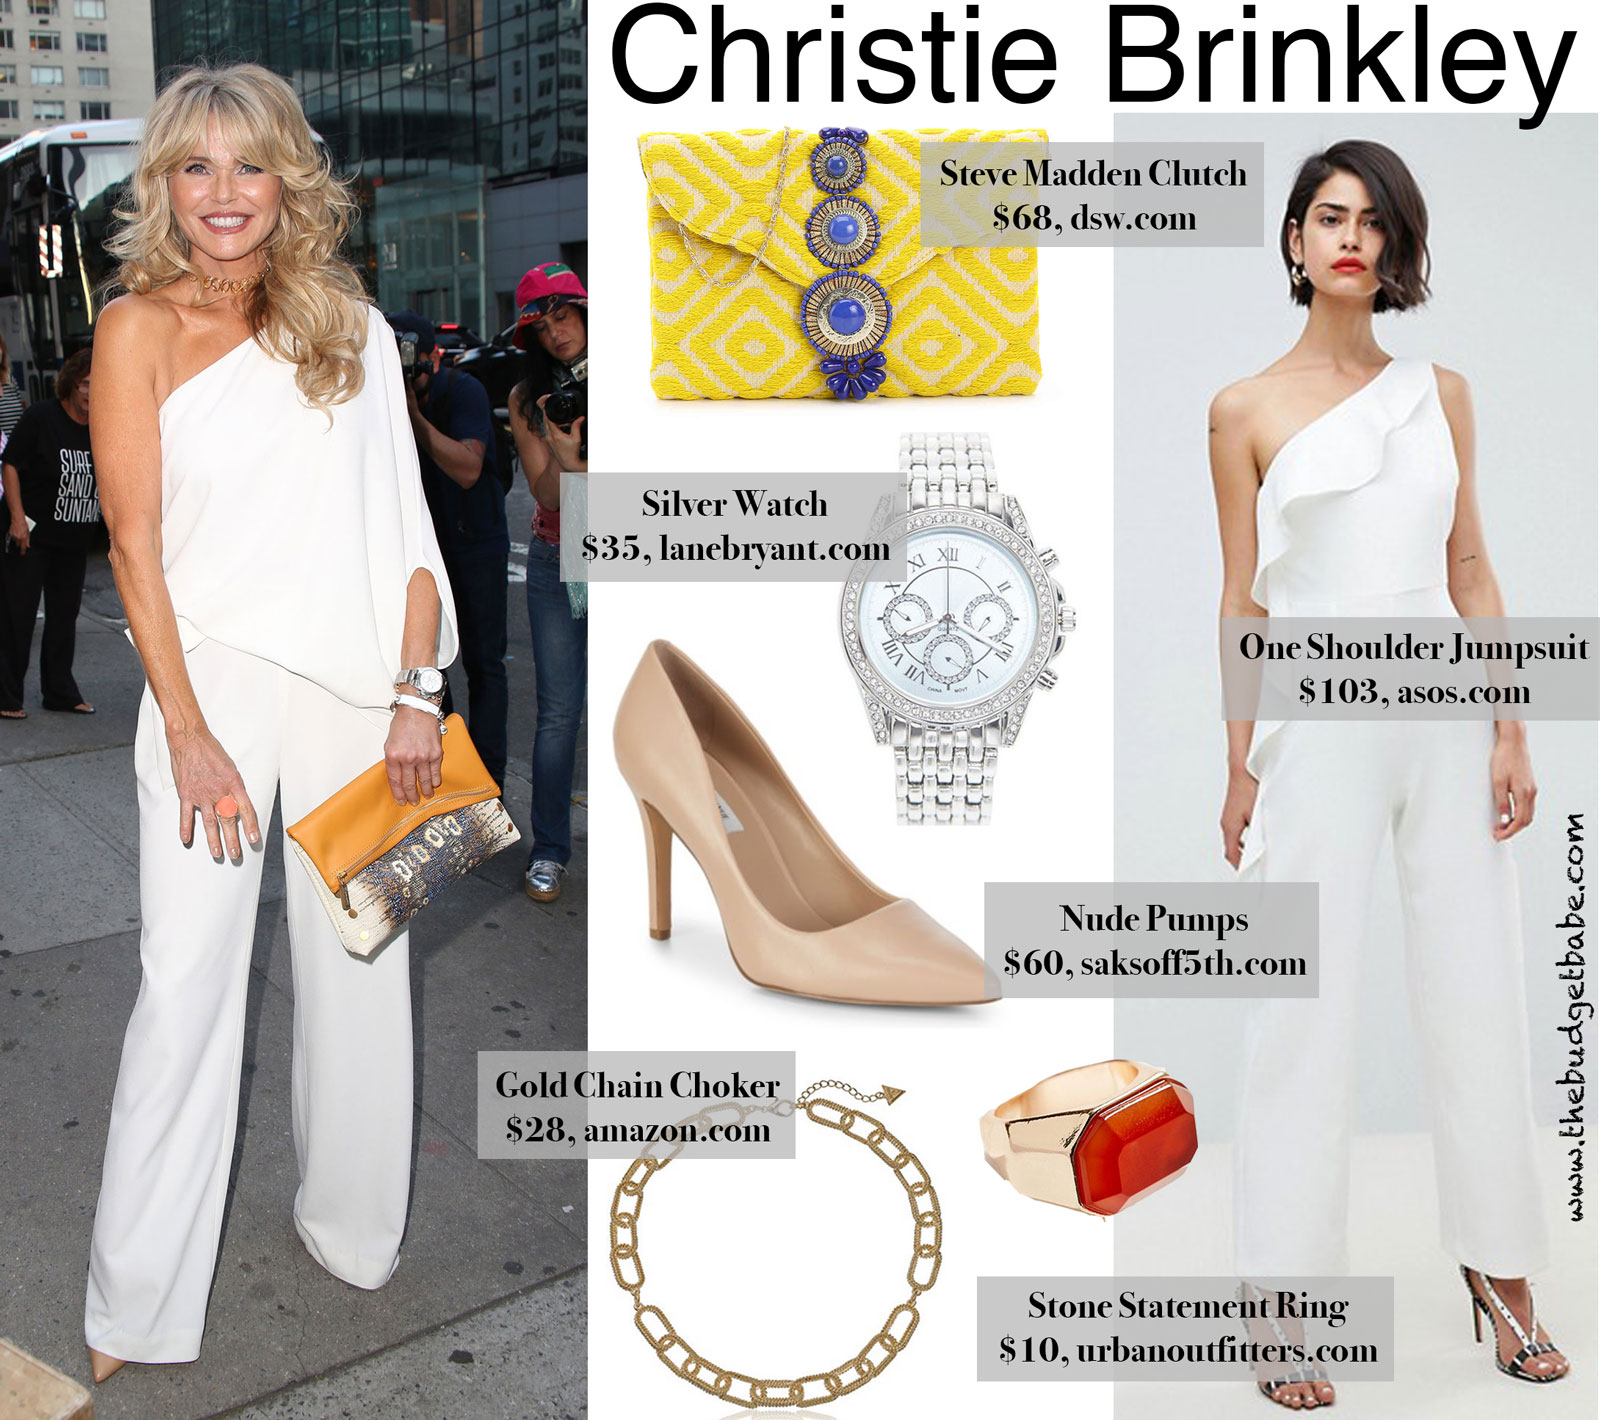 Christie Brinkely's One Shoulder Jumpsuit Look for Less